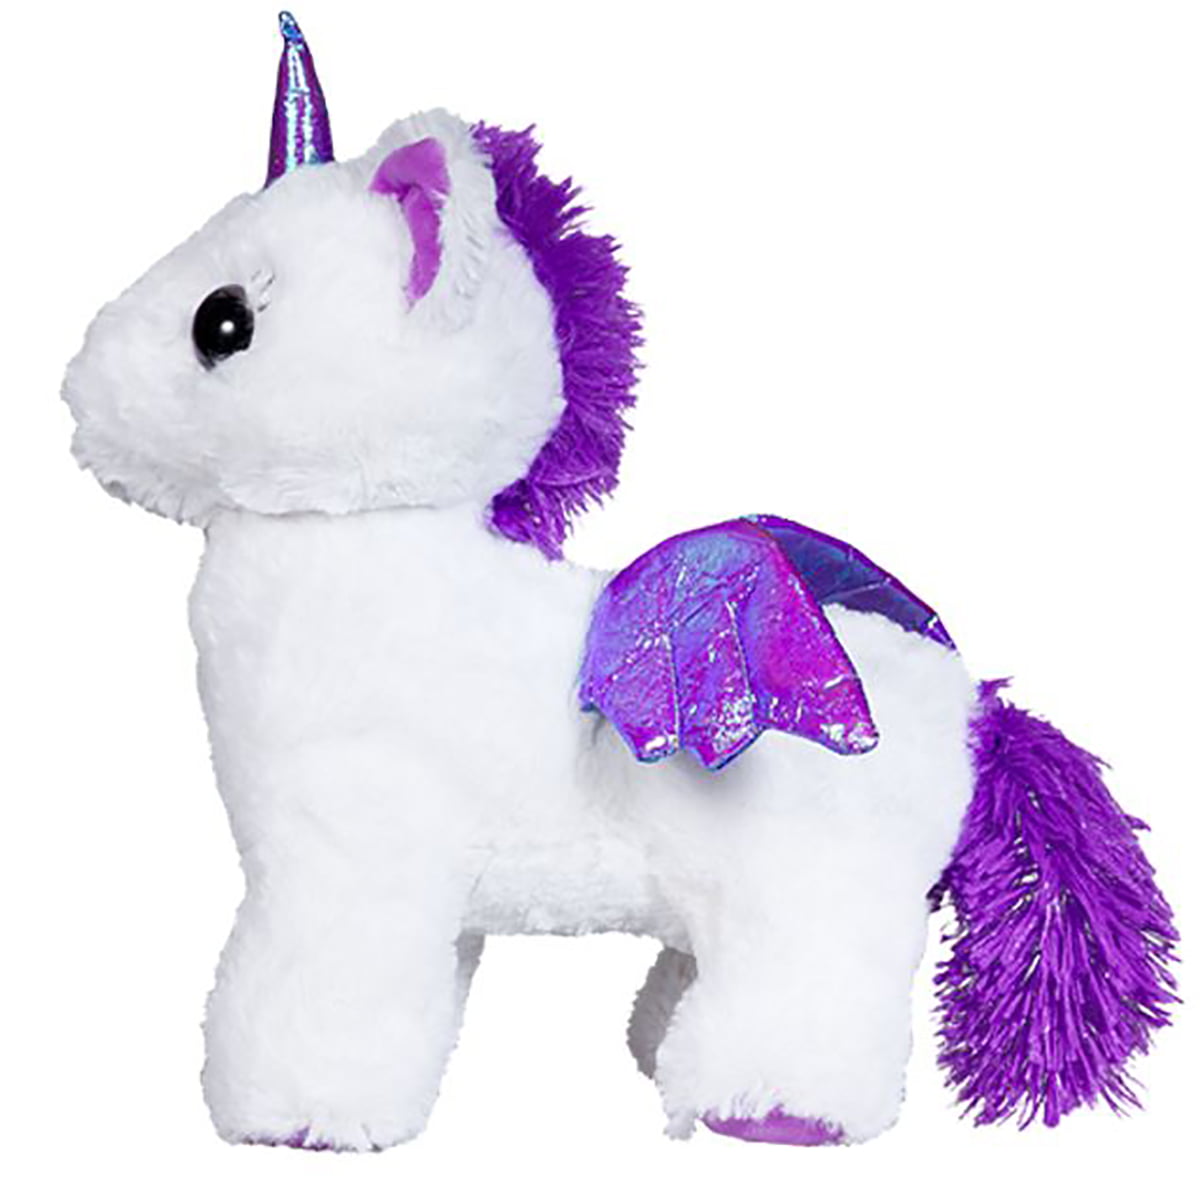 Make Your Own Stuffed Animal Mini 8 Inch Stardust the Pegasus Kit No Sewing Re 